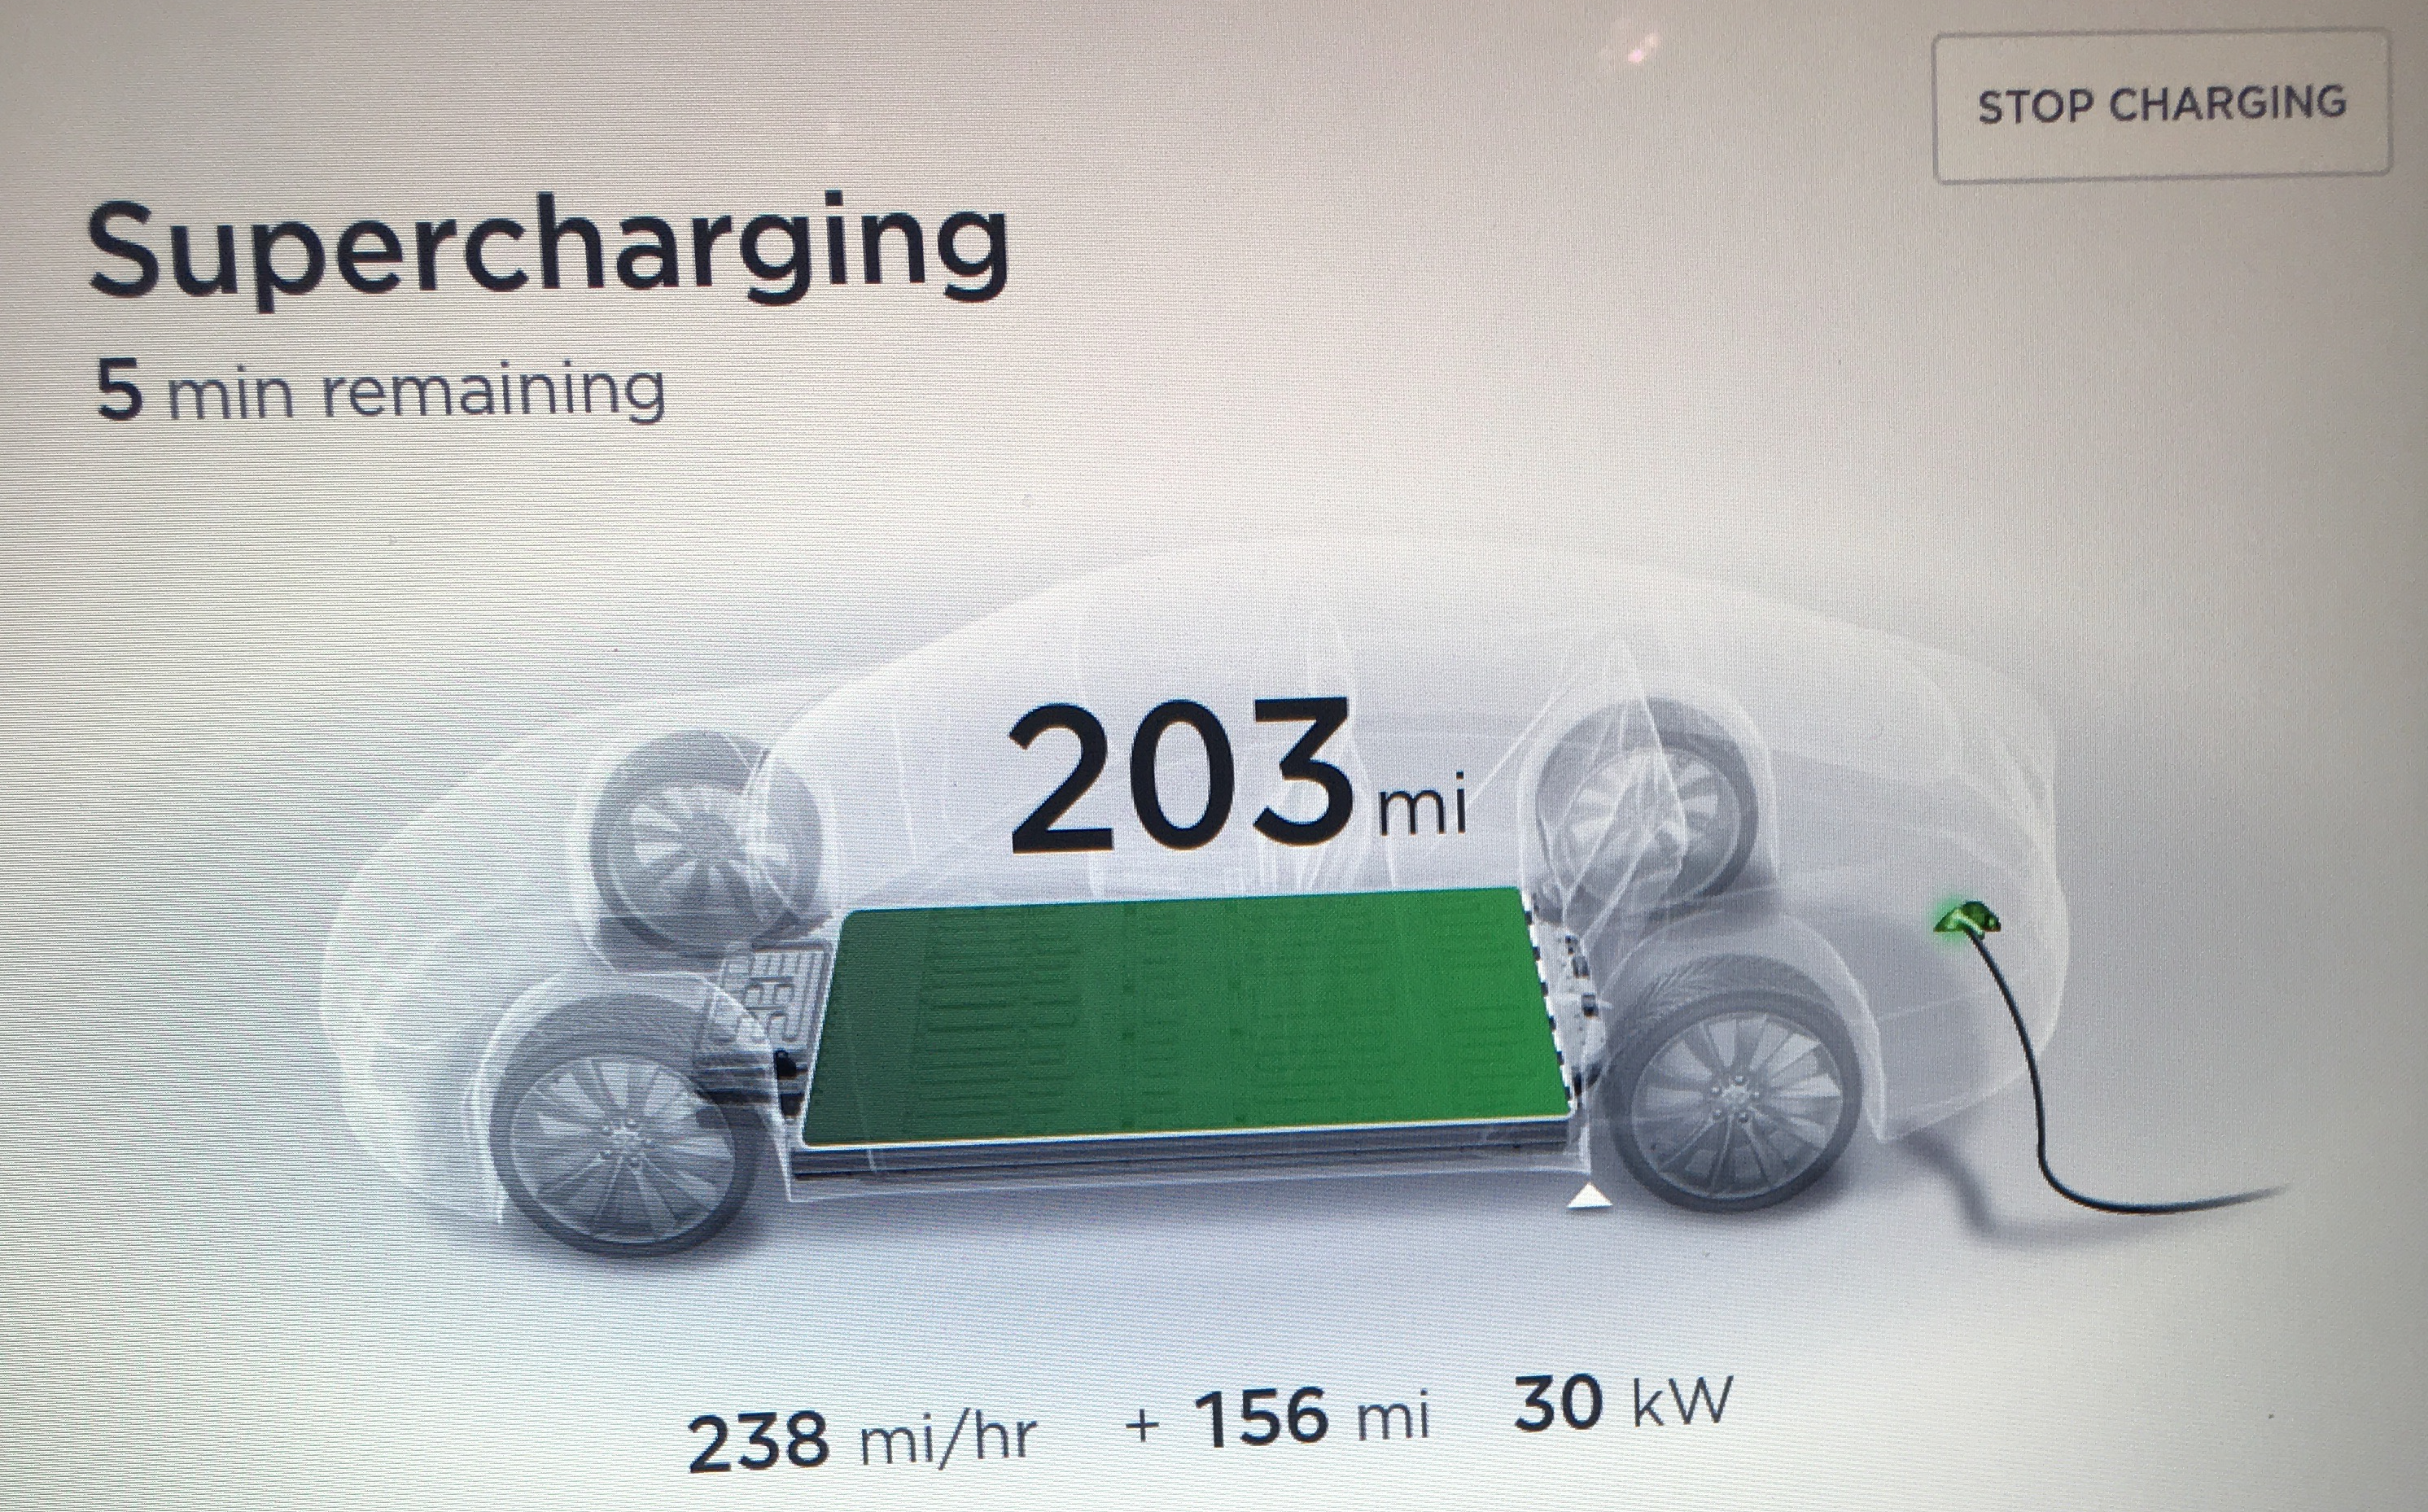 Kettleman City - 203 miles of charge